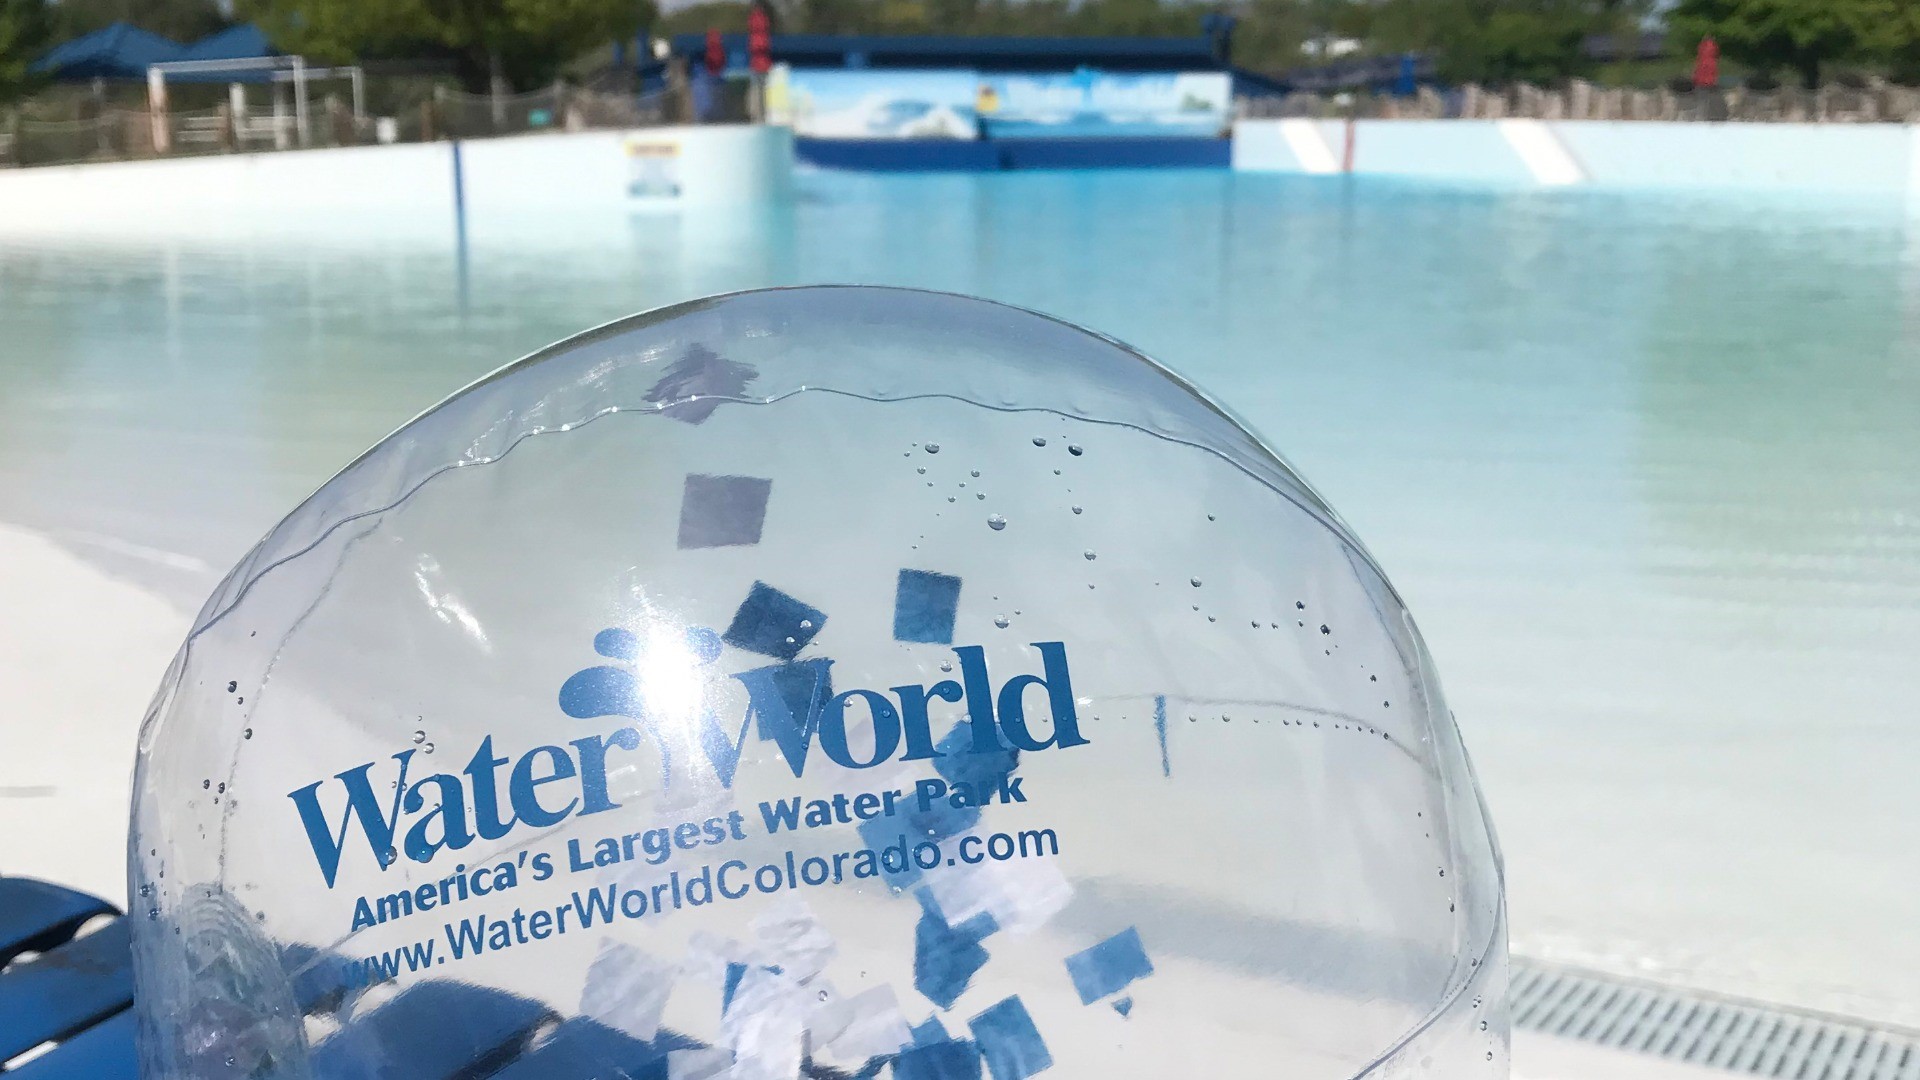 After being closed for all of 2020, Water World in Federal Heights, Colorado reopens Saturday, May 29, 2021 for a summer of fun.